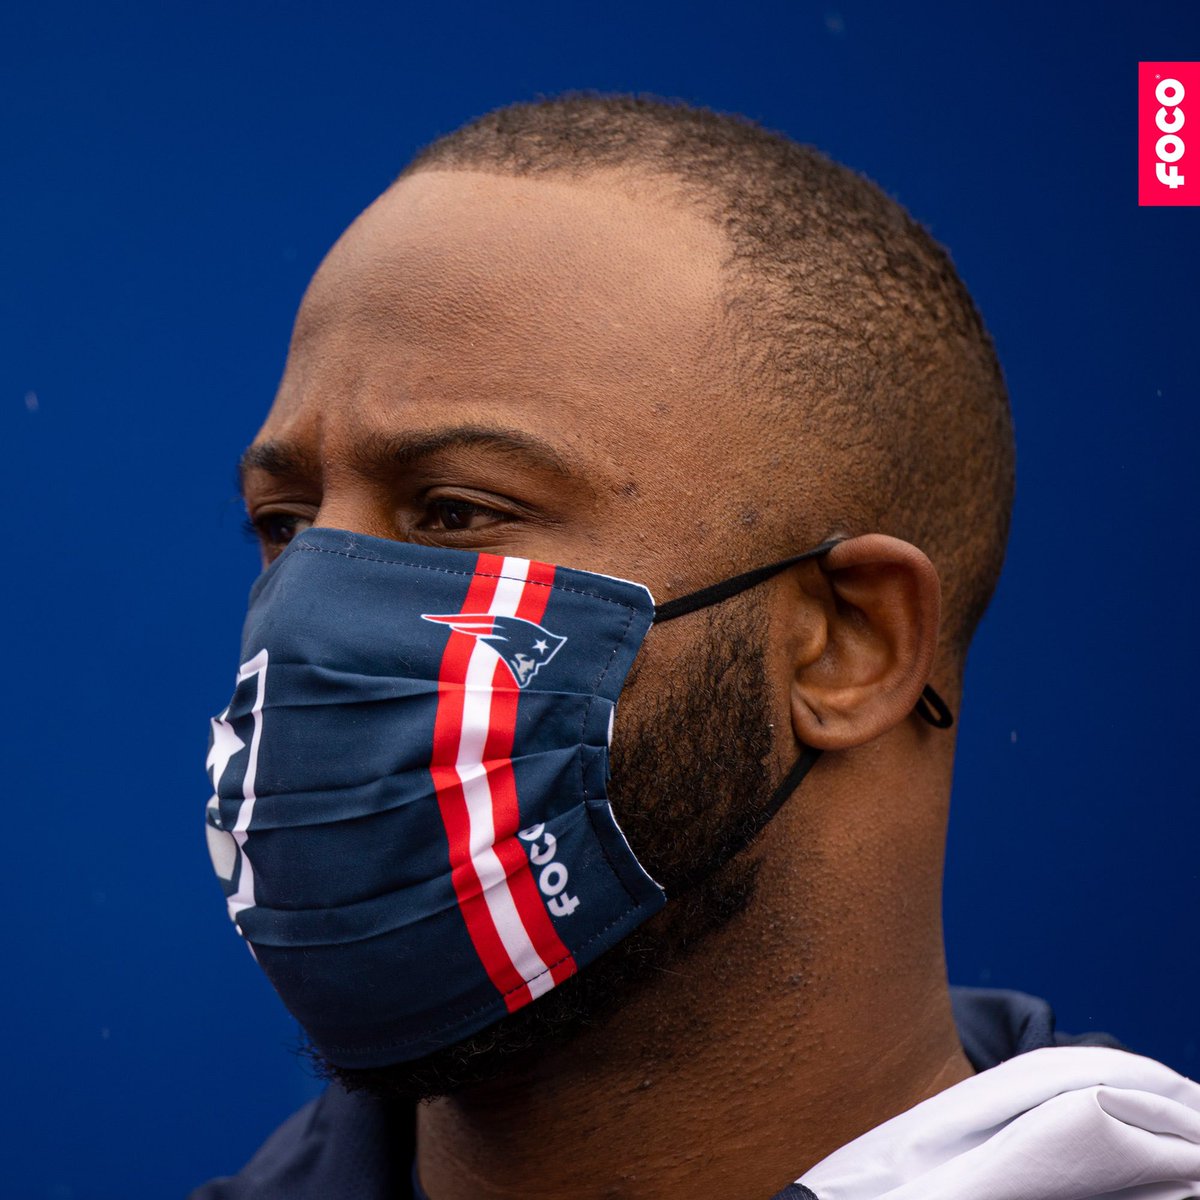 Stay Ready. Stay Safe. Thanks to my #FOCOfamily for the face cover. Check them out on FOCO.com! #teamFOCO #ad